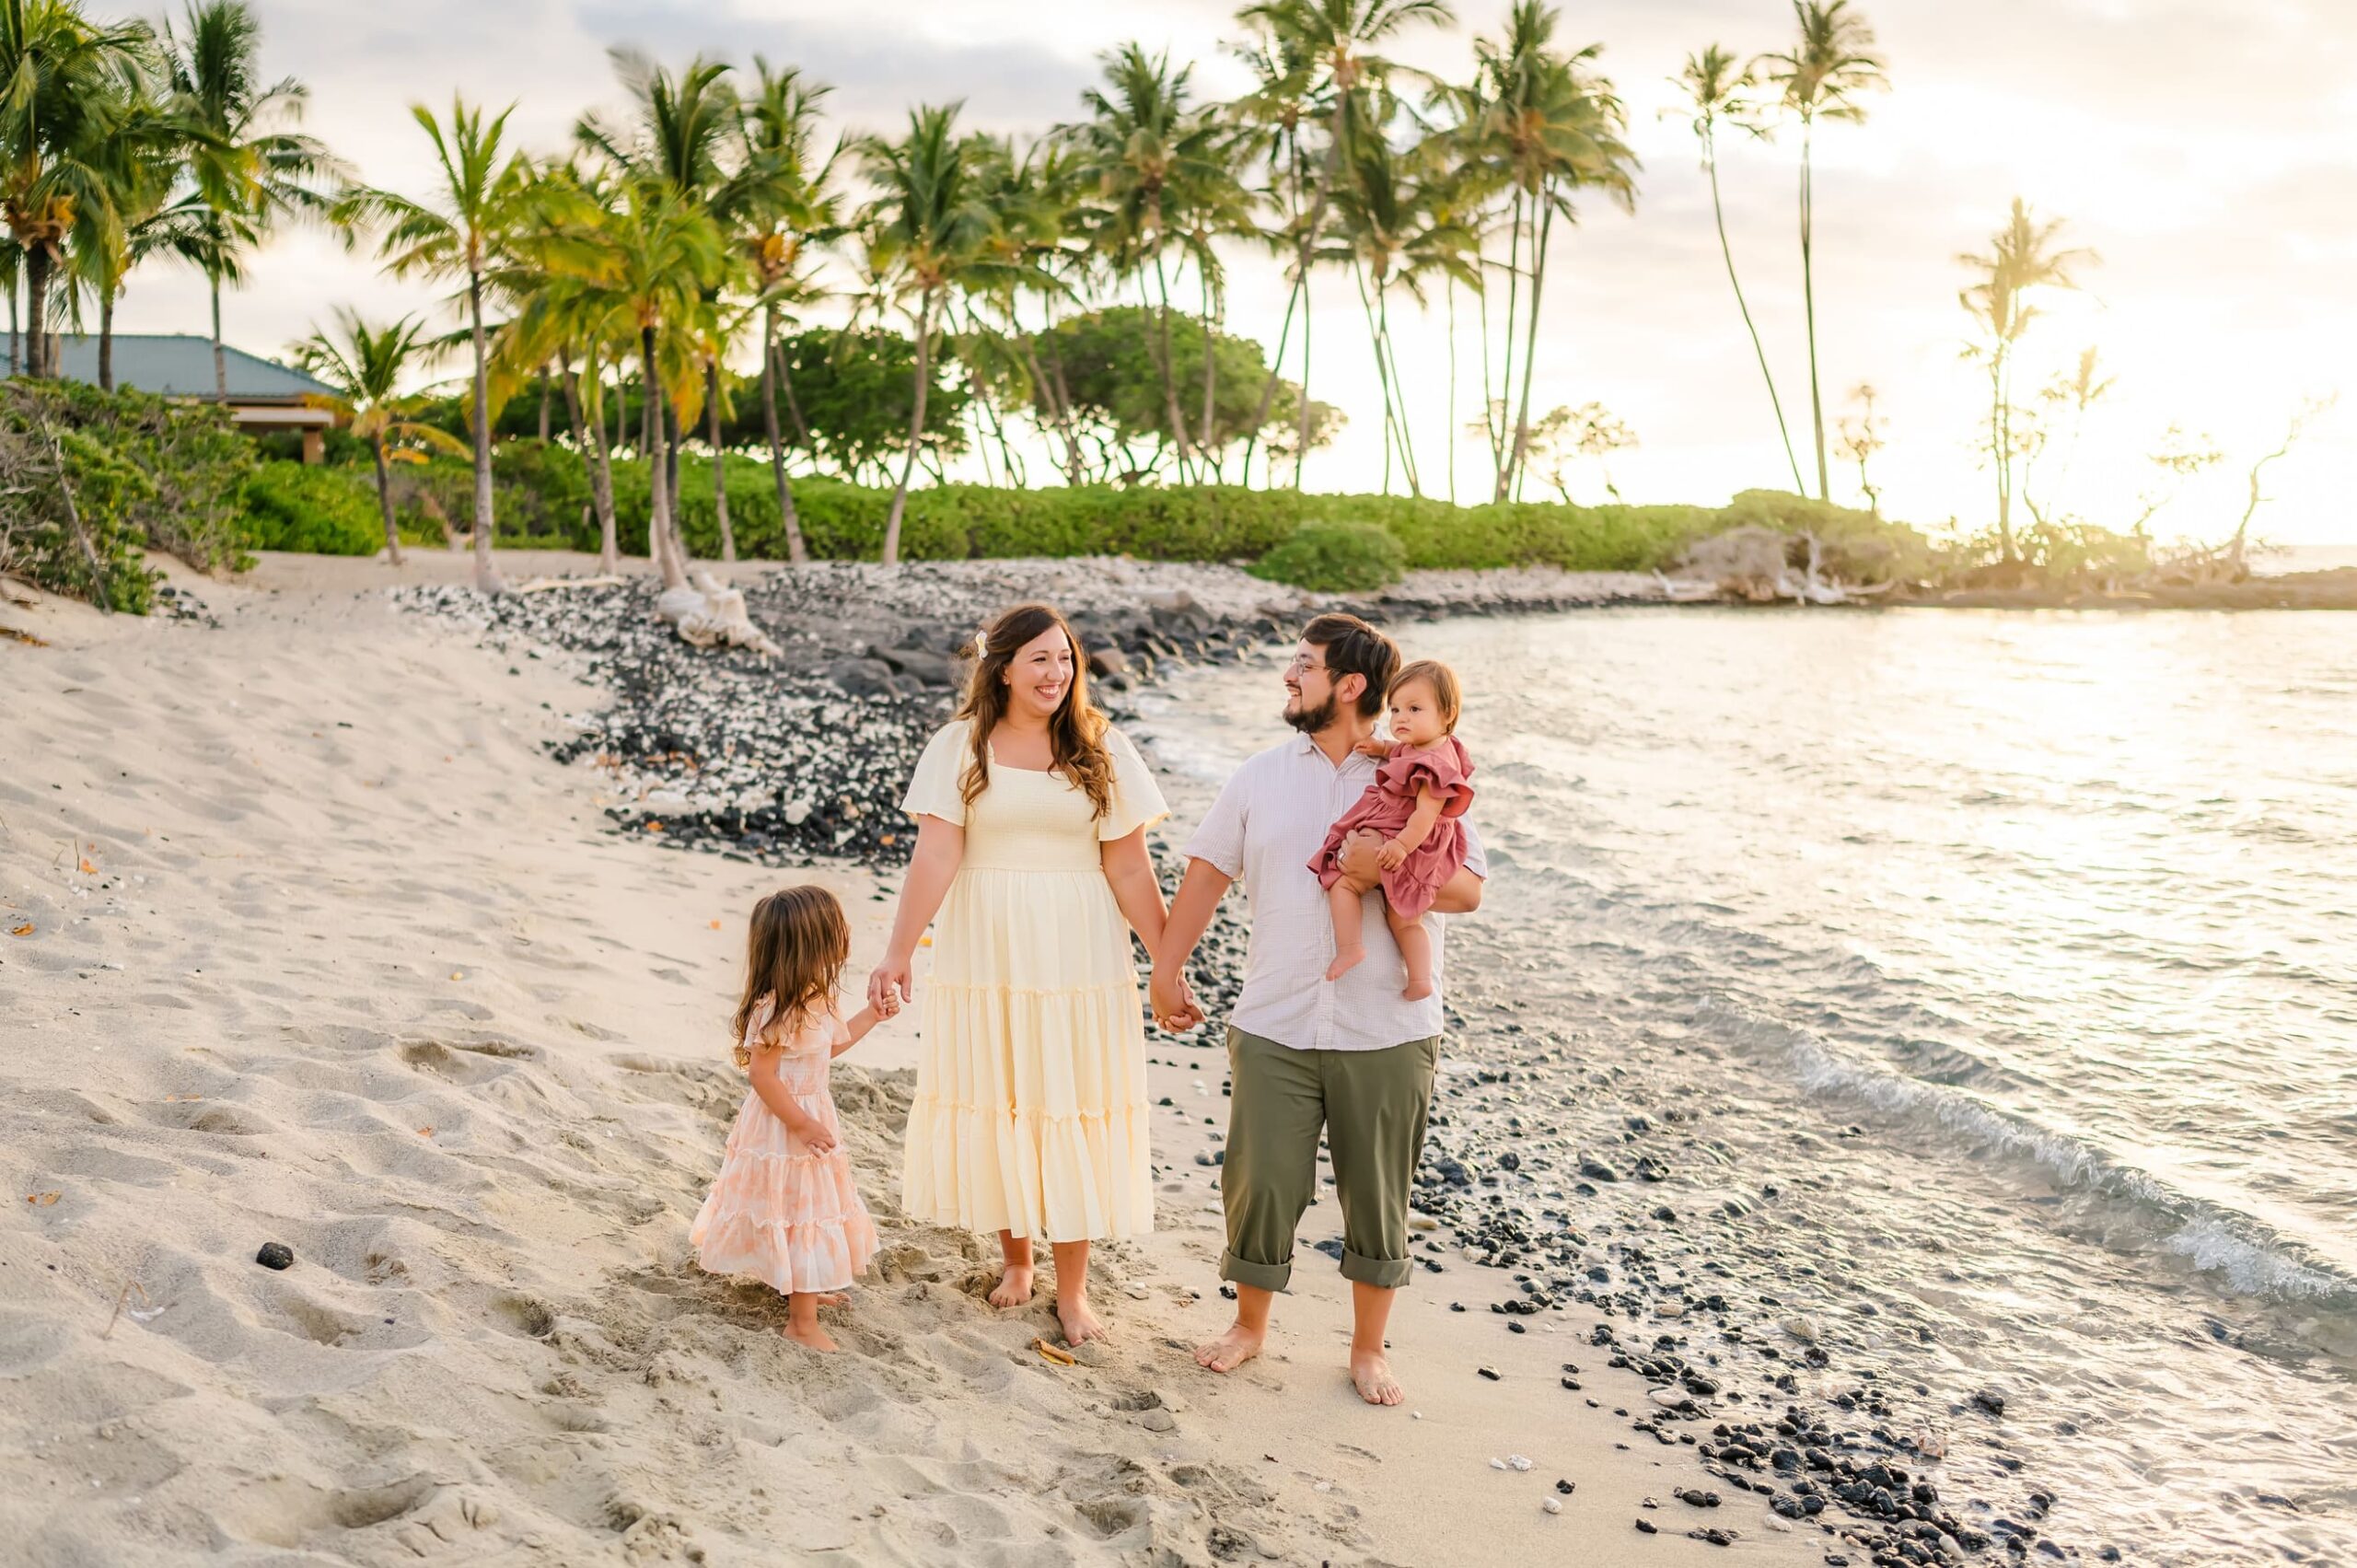 Hawaii Photographer: Funny Poses for Pictures with Friends - Professional  Family & Couple Photographers Hawaii